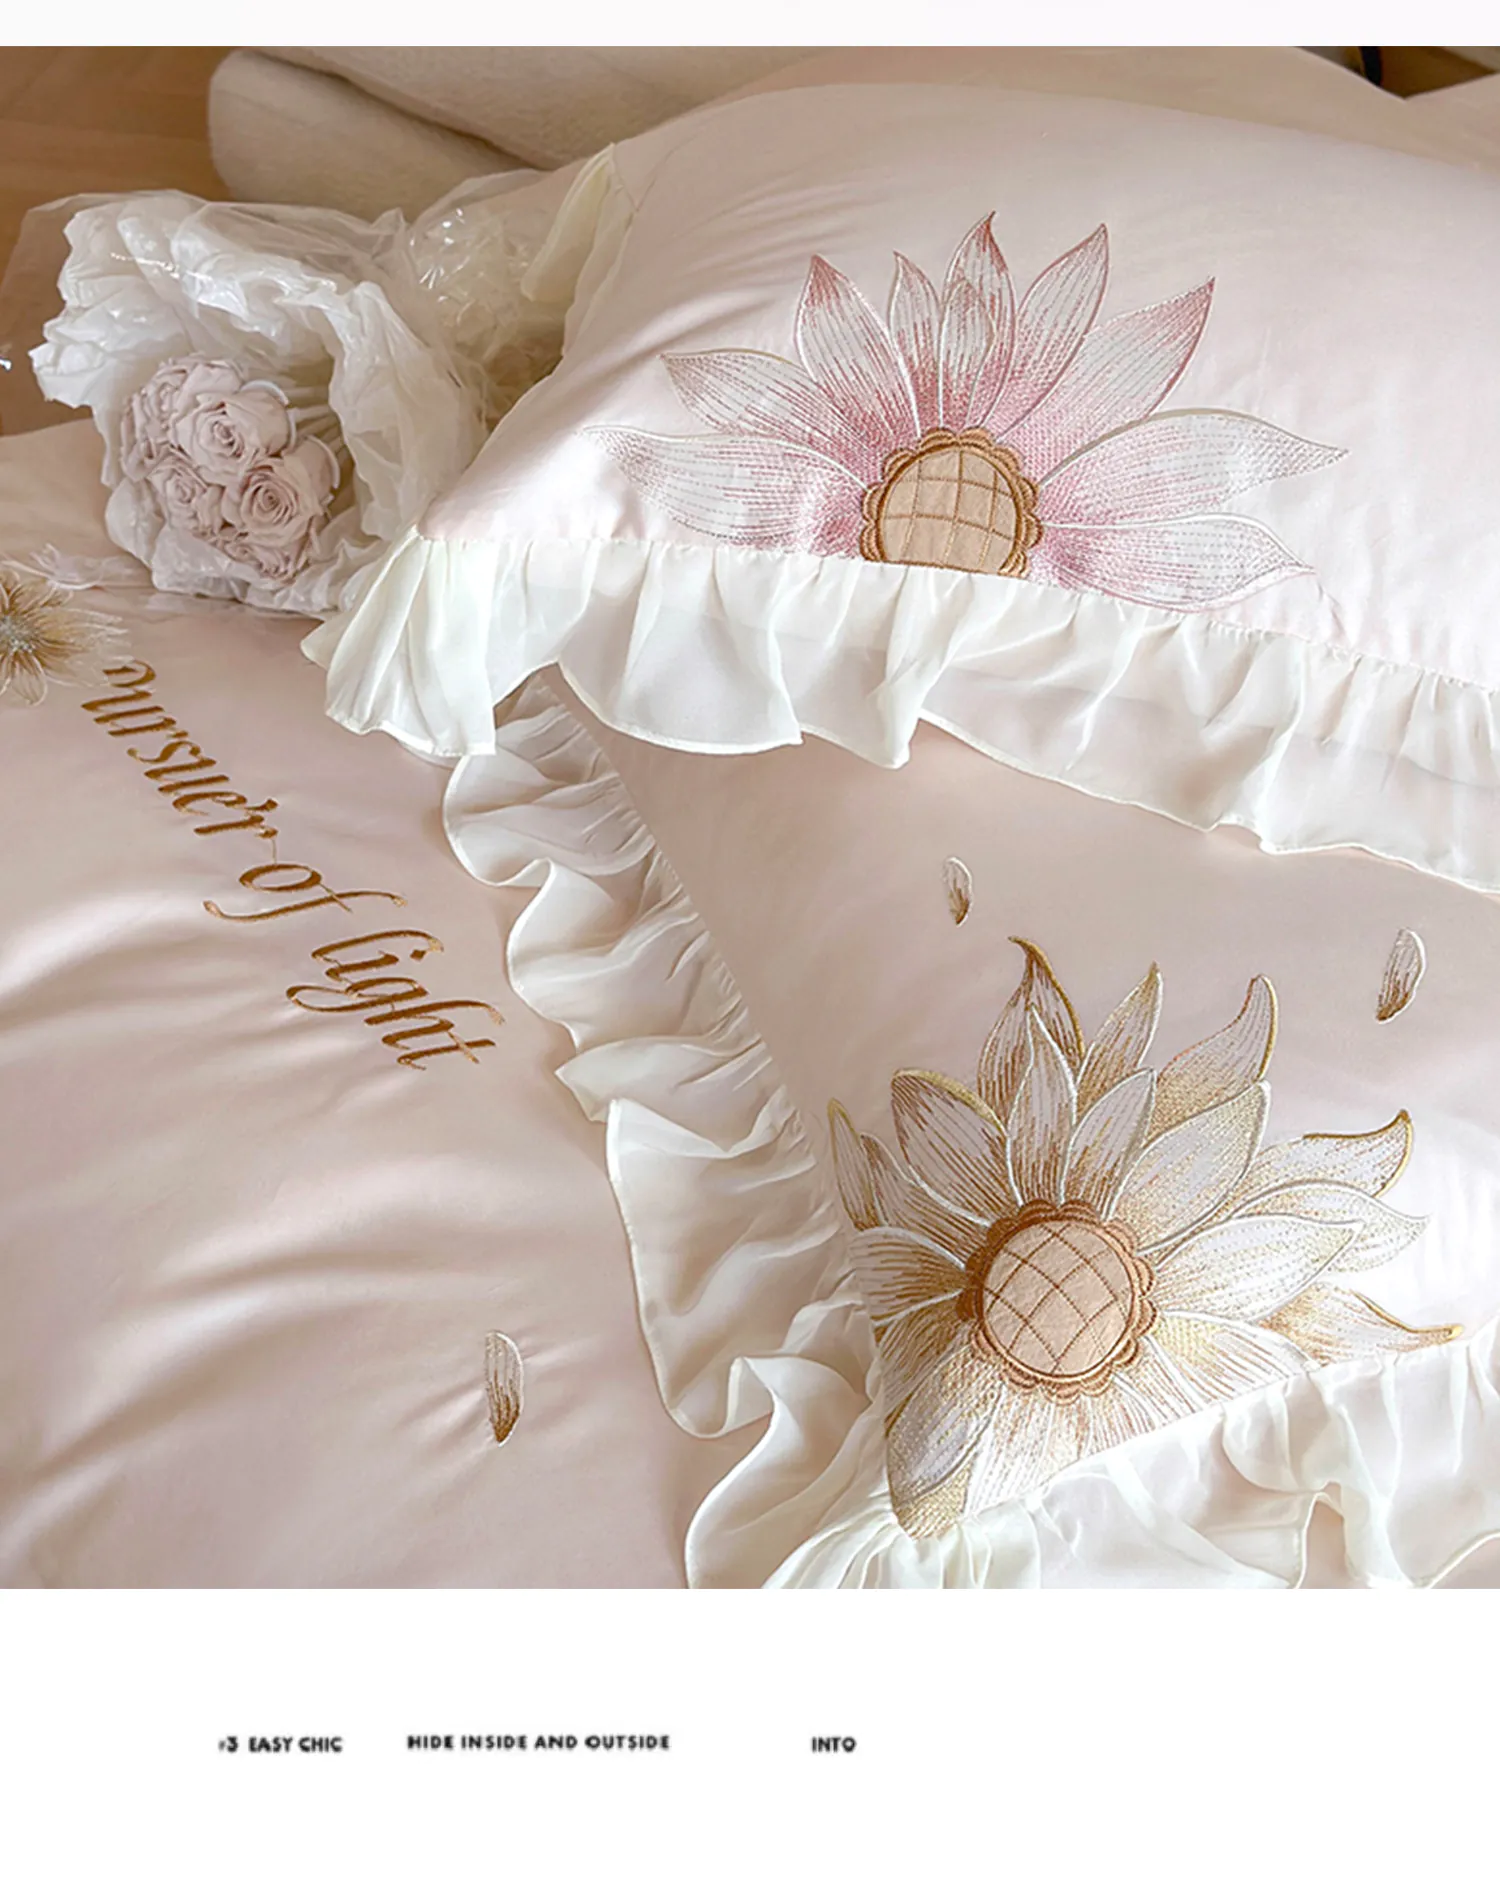 Soft-100-Egypt-Cotton-Embroidery-Ruffle-Bedding-Set-with-Sunflower16